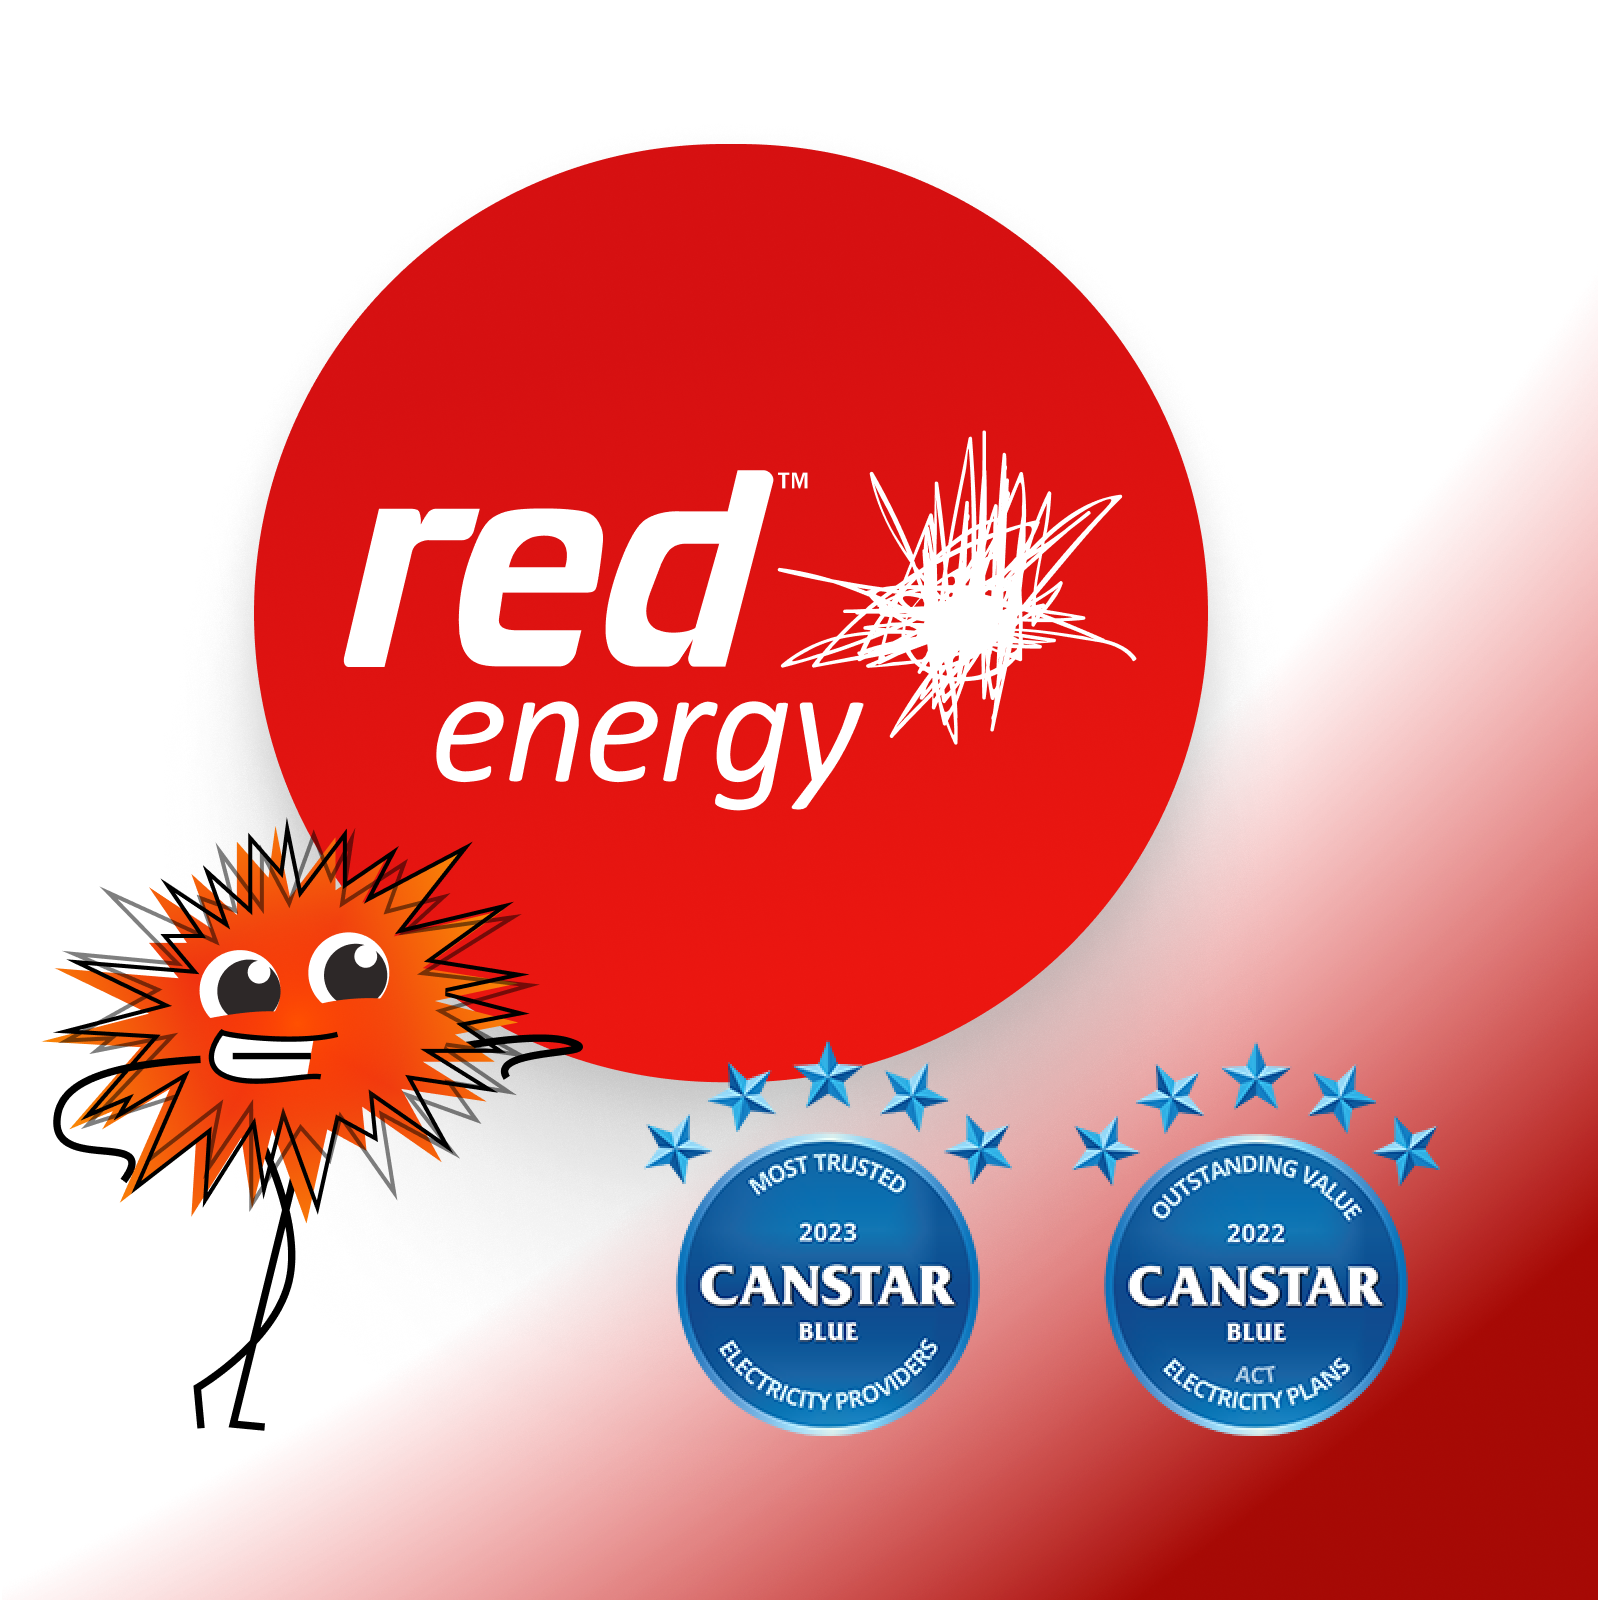 The Red Energy logo with two 'Canstar Blue' award badges. One award for 'Most trusted energy providers' and one award for 'Outstanding value - ACT Electricity plans'.